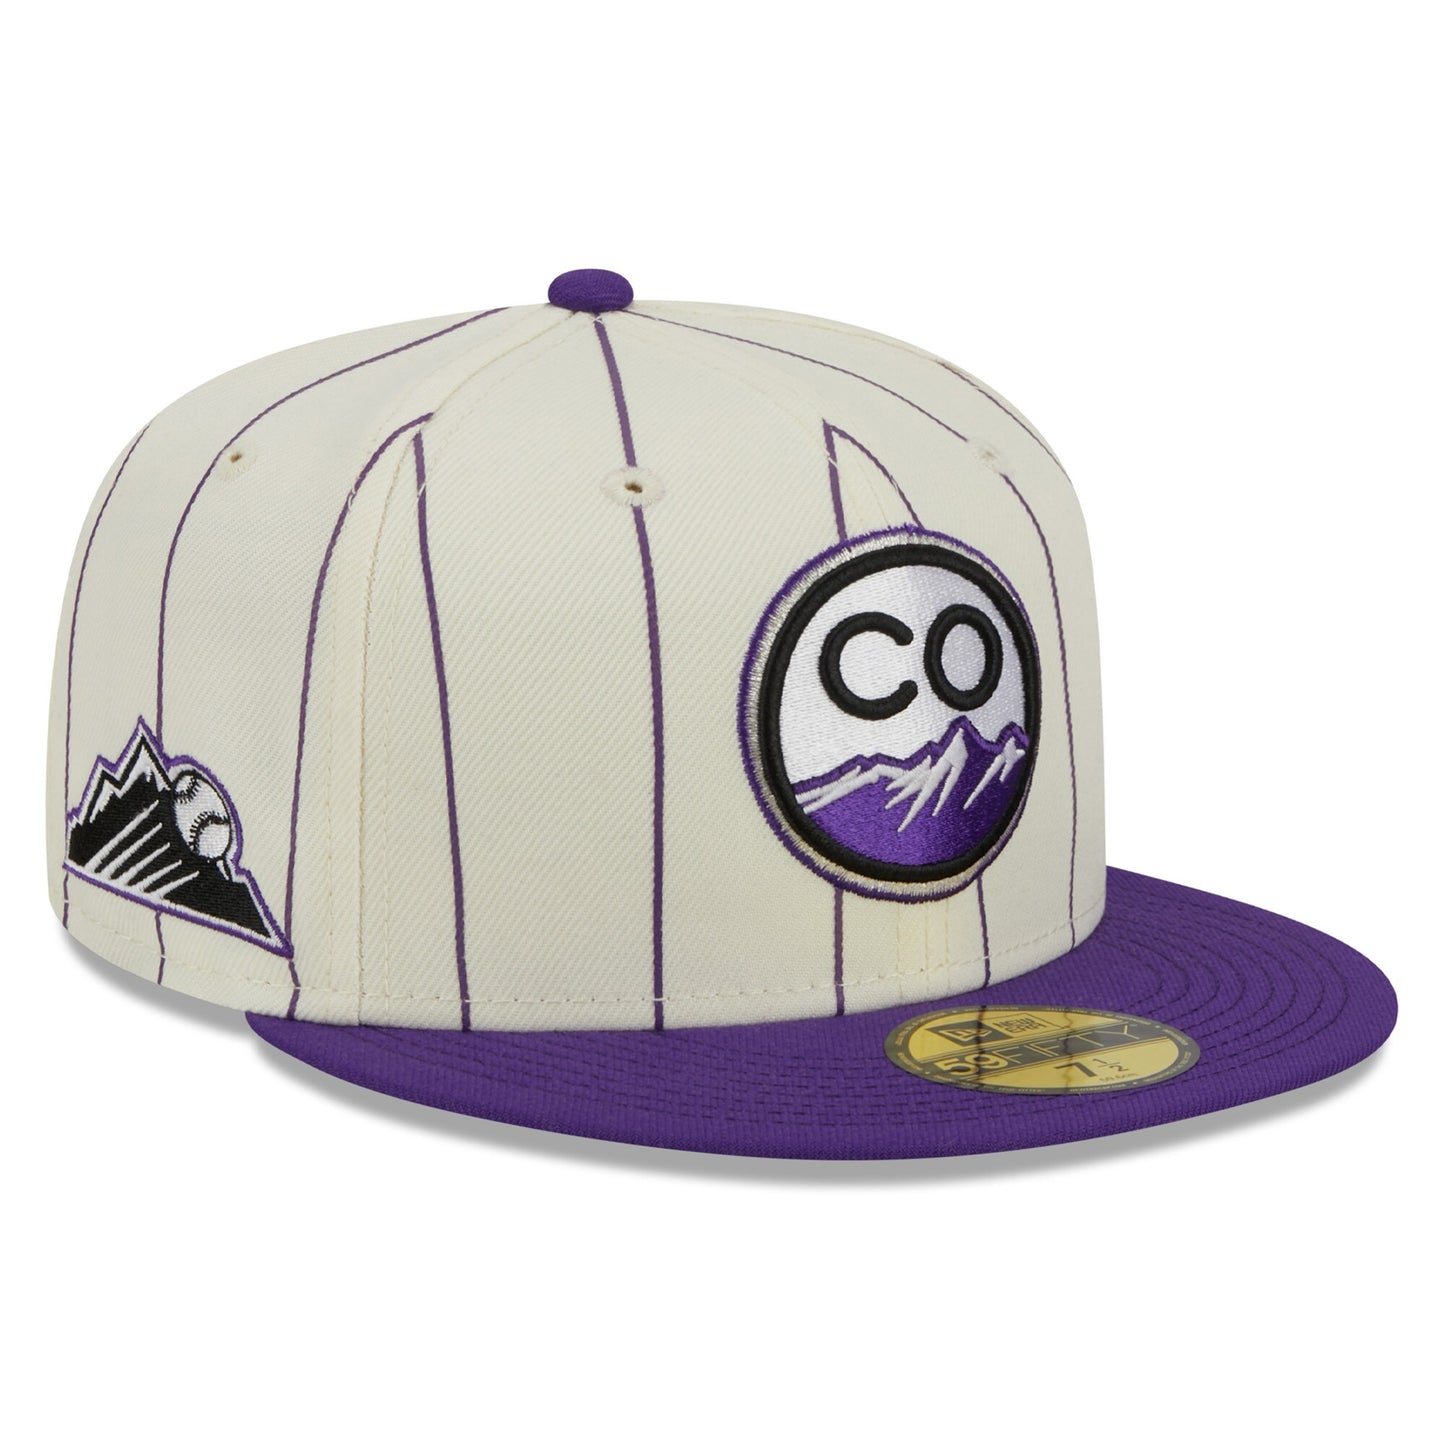 Colorado Rockies New Era Cooperstown Collection Retro City 59FIFTY Fitted Hat - White